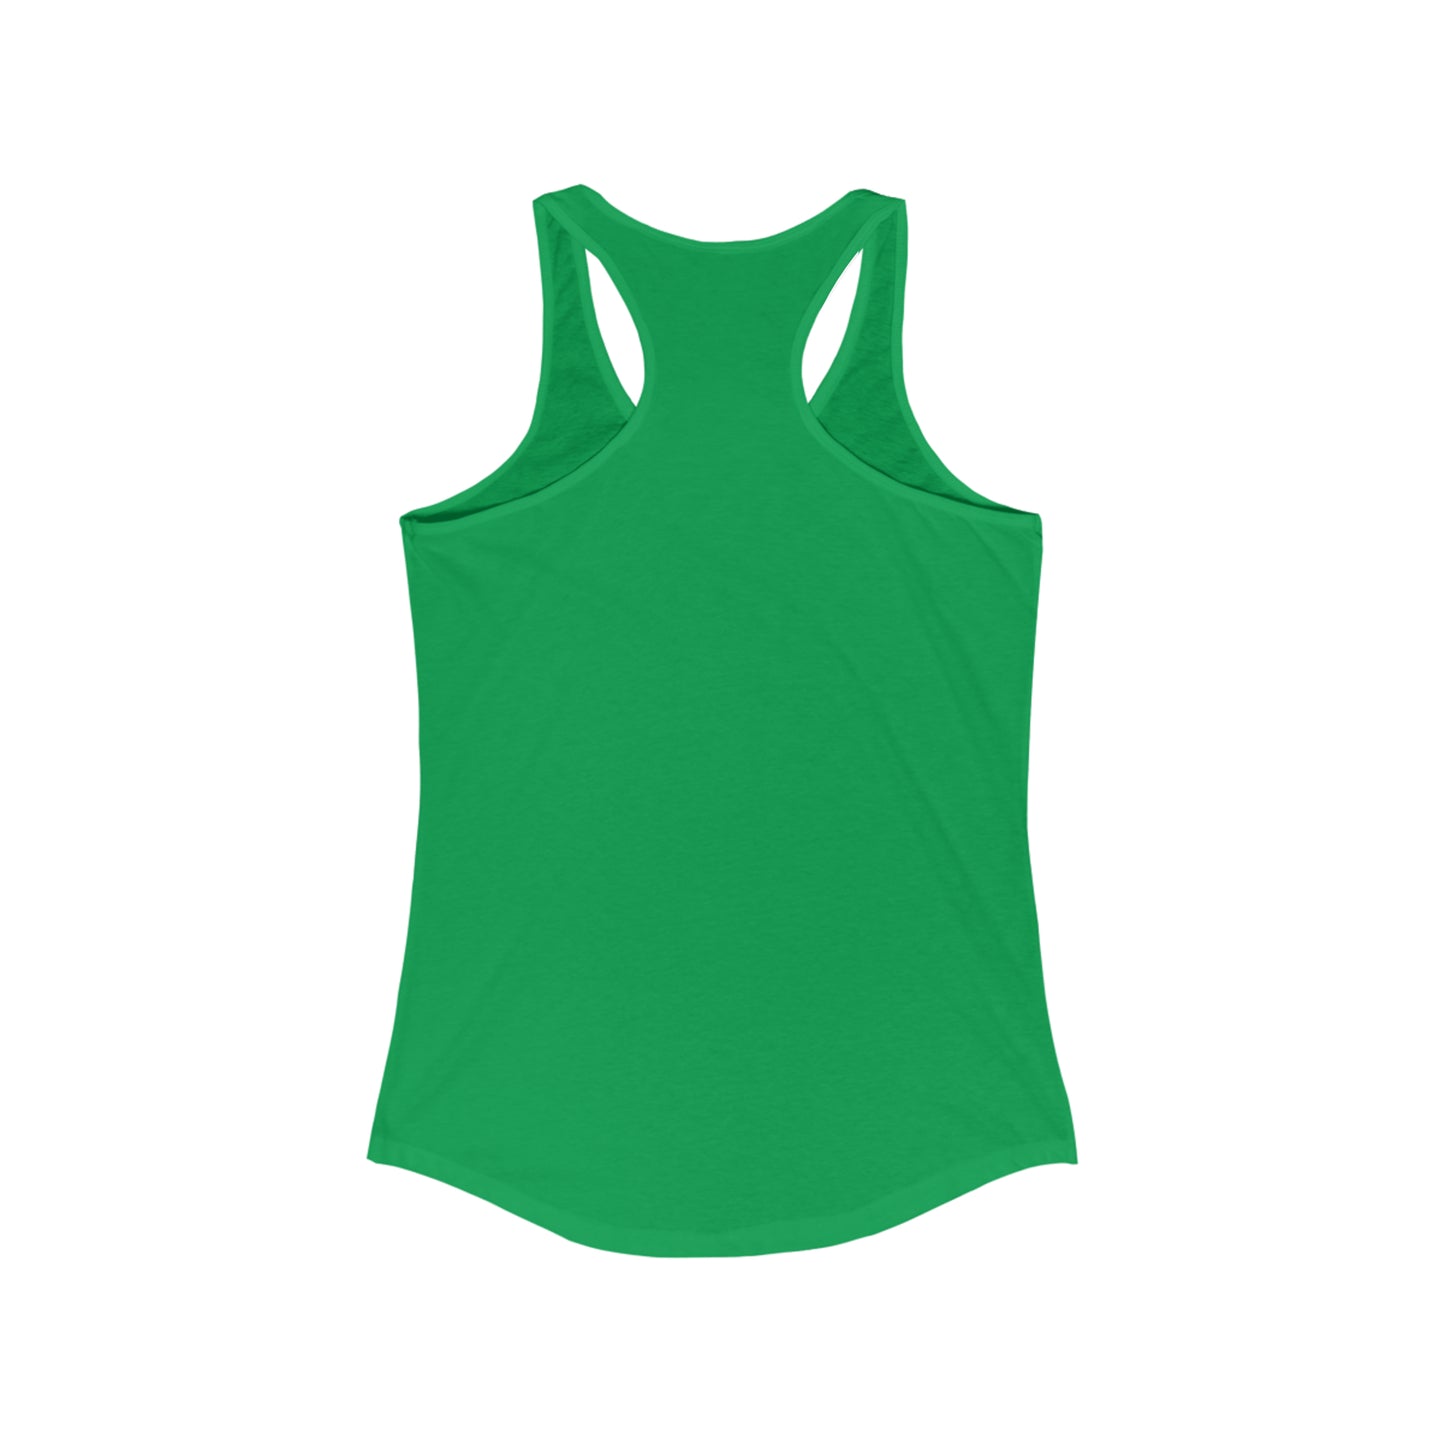 I'll Dink To That Super Cute, Funny Women's Pickleball Tank Top